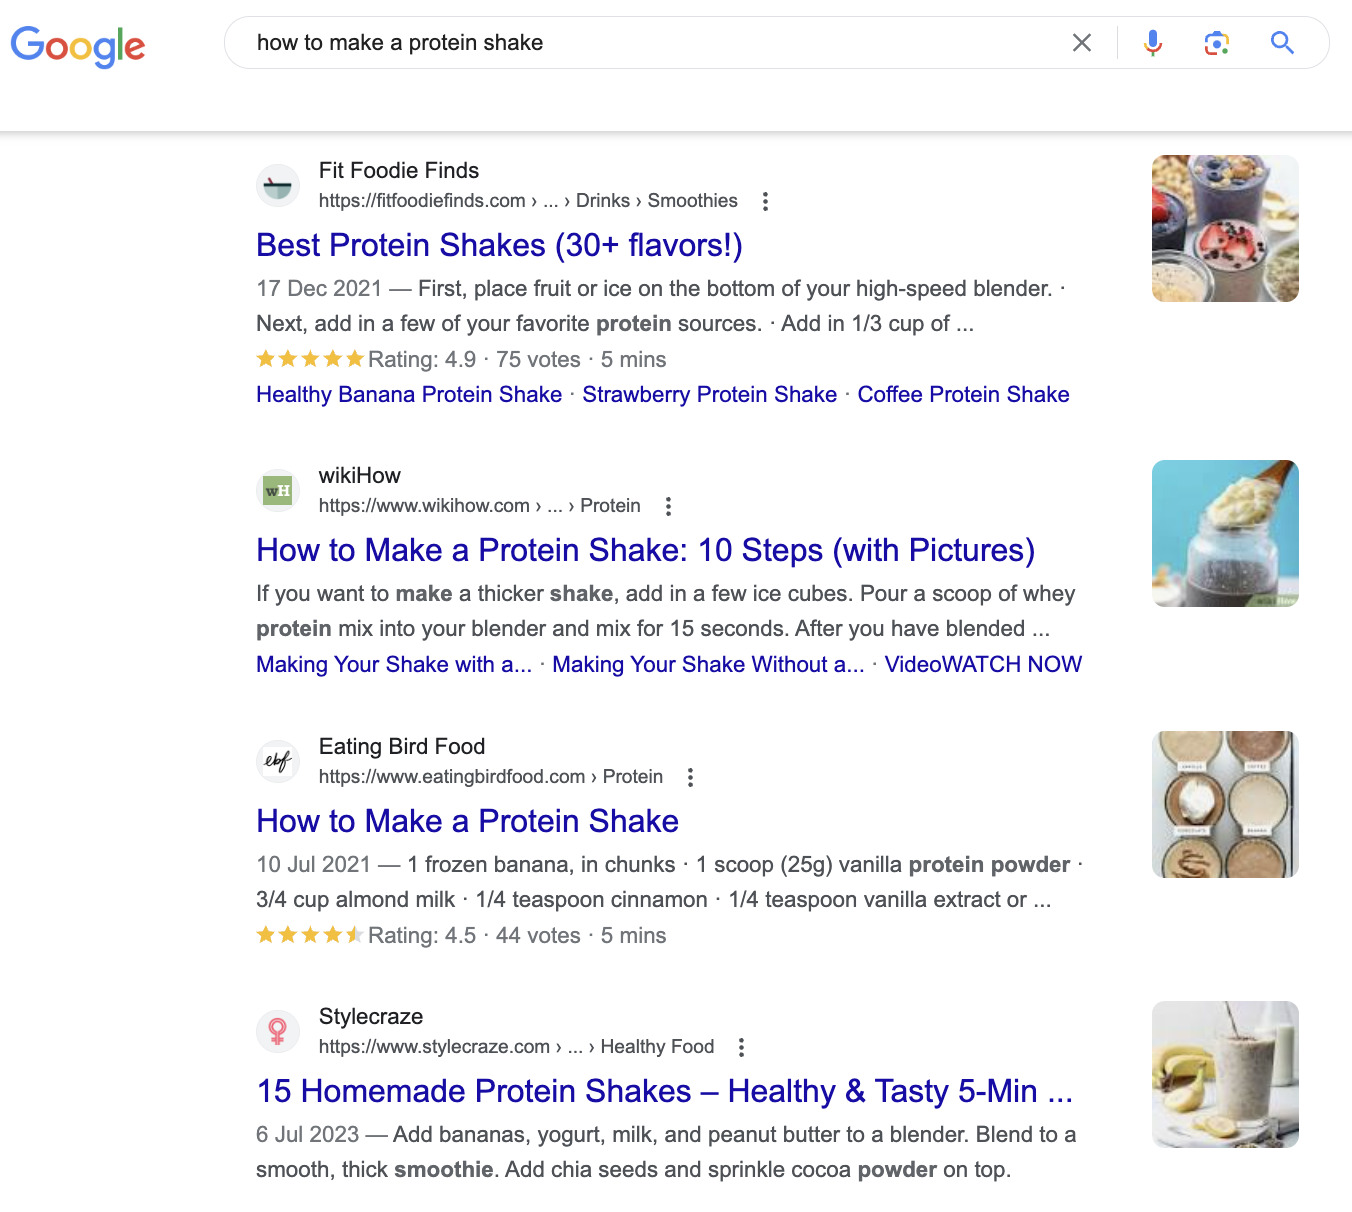 Google SERP for "how to make a protein shake"